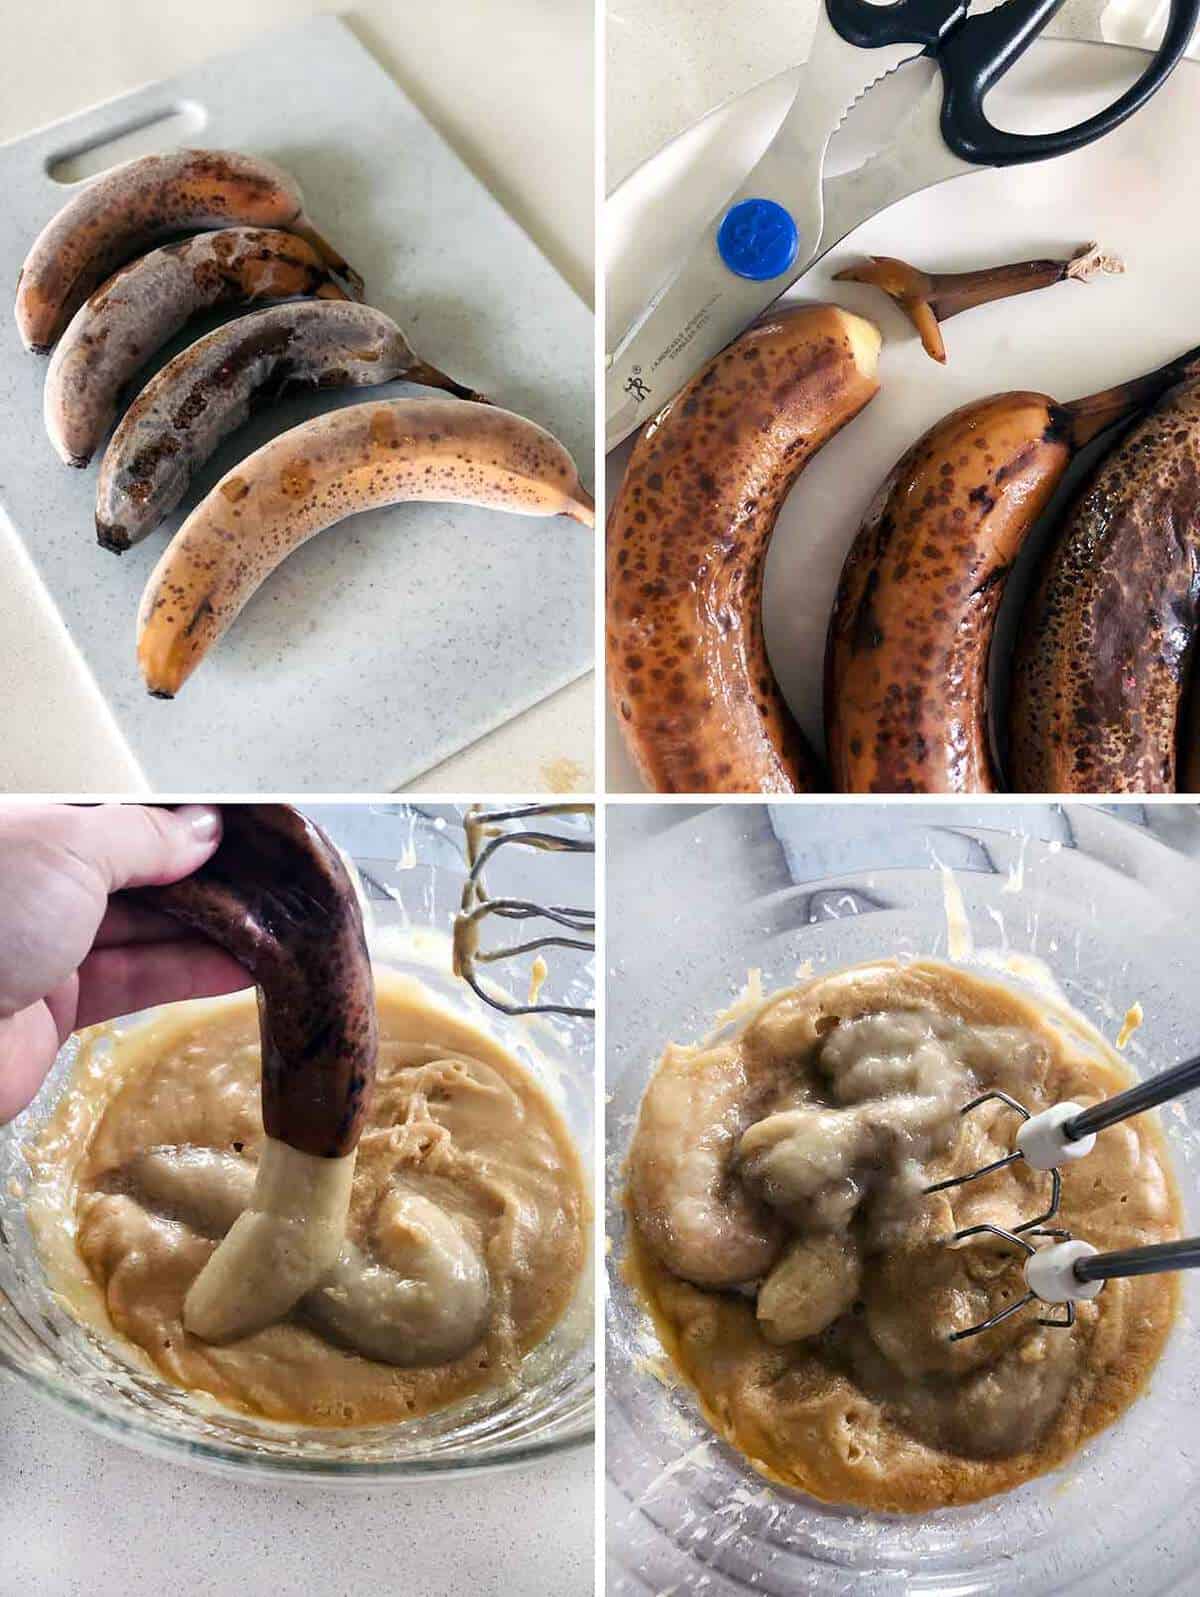 Using whole frozen bananas to bake with